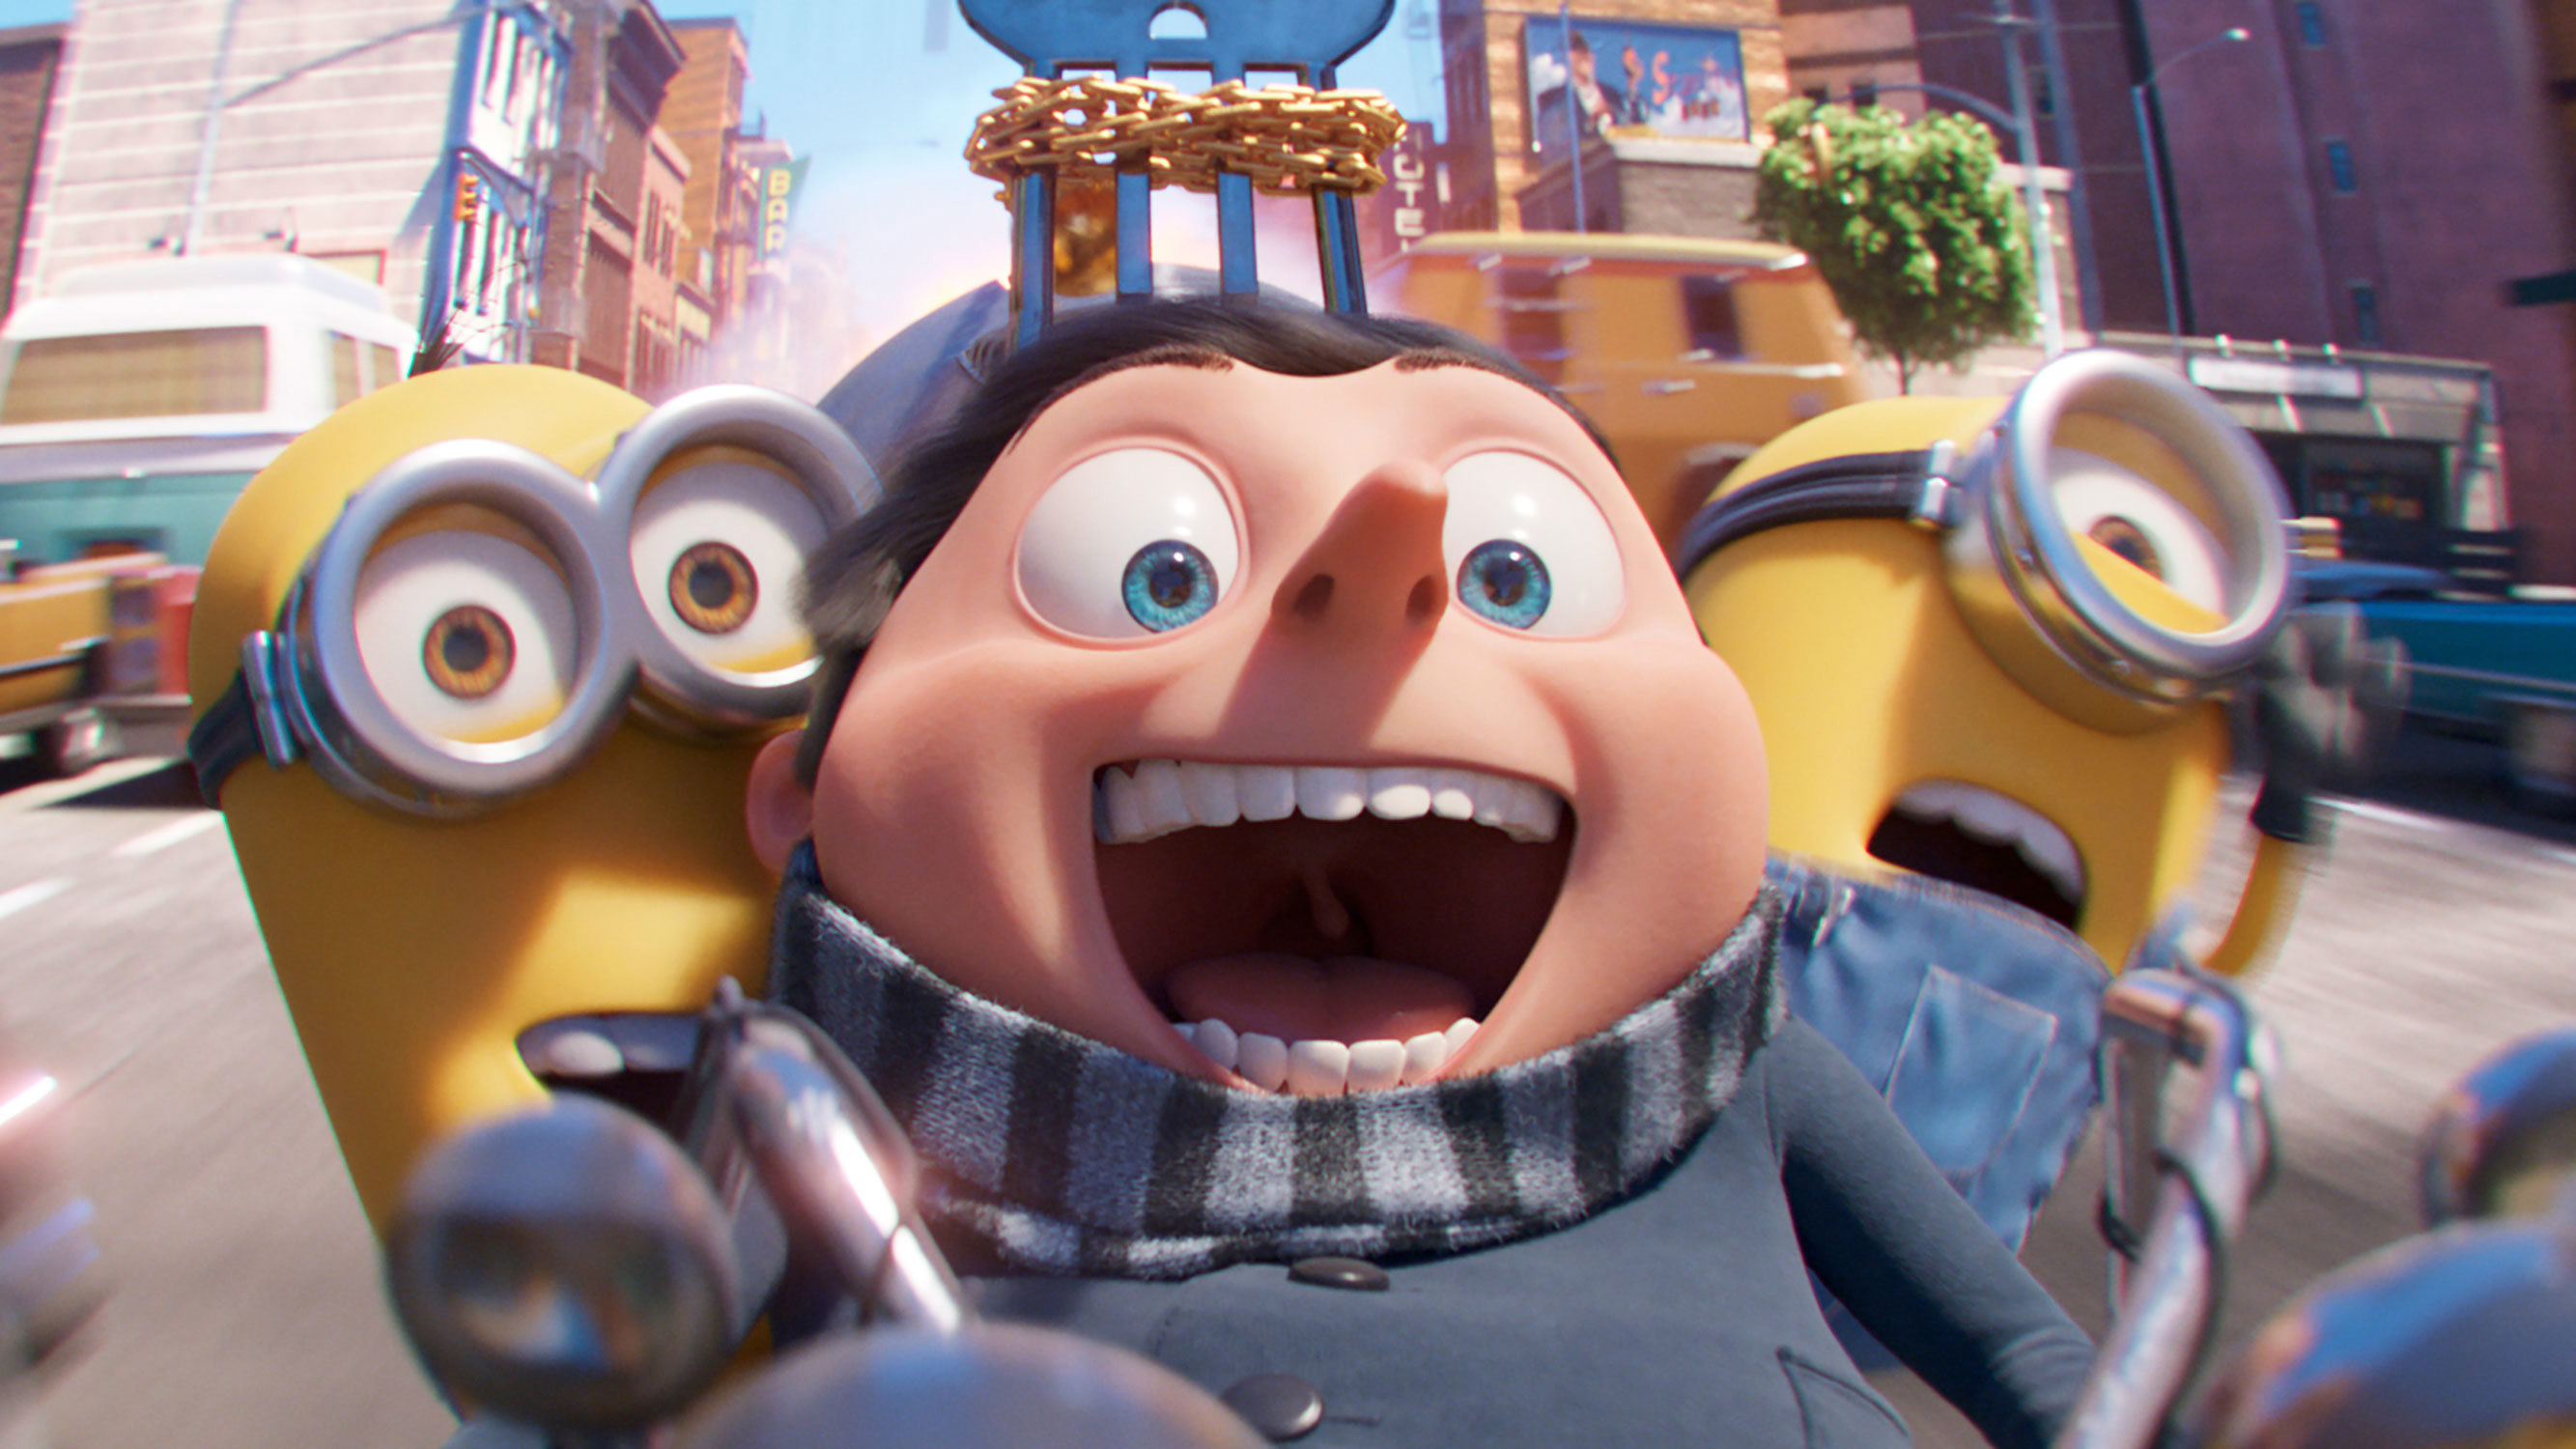 Minions: The Rise of Gru' breaks box office records